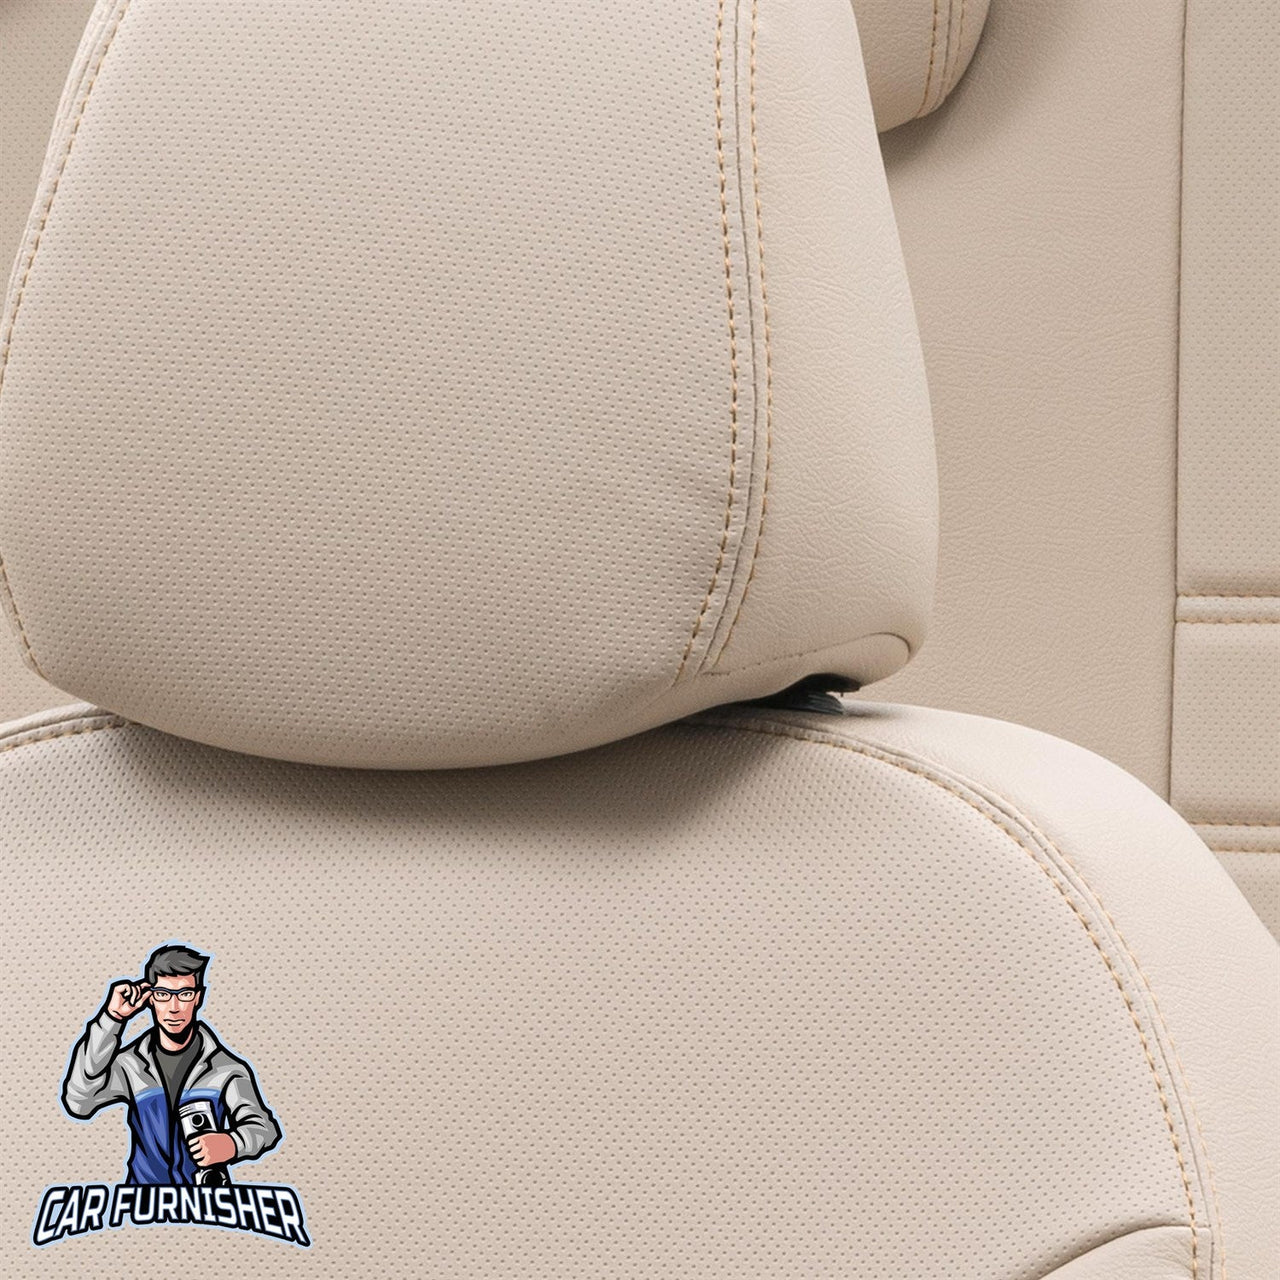 Jeep Compass Seat Covers Istanbul Leather Design Beige Leather